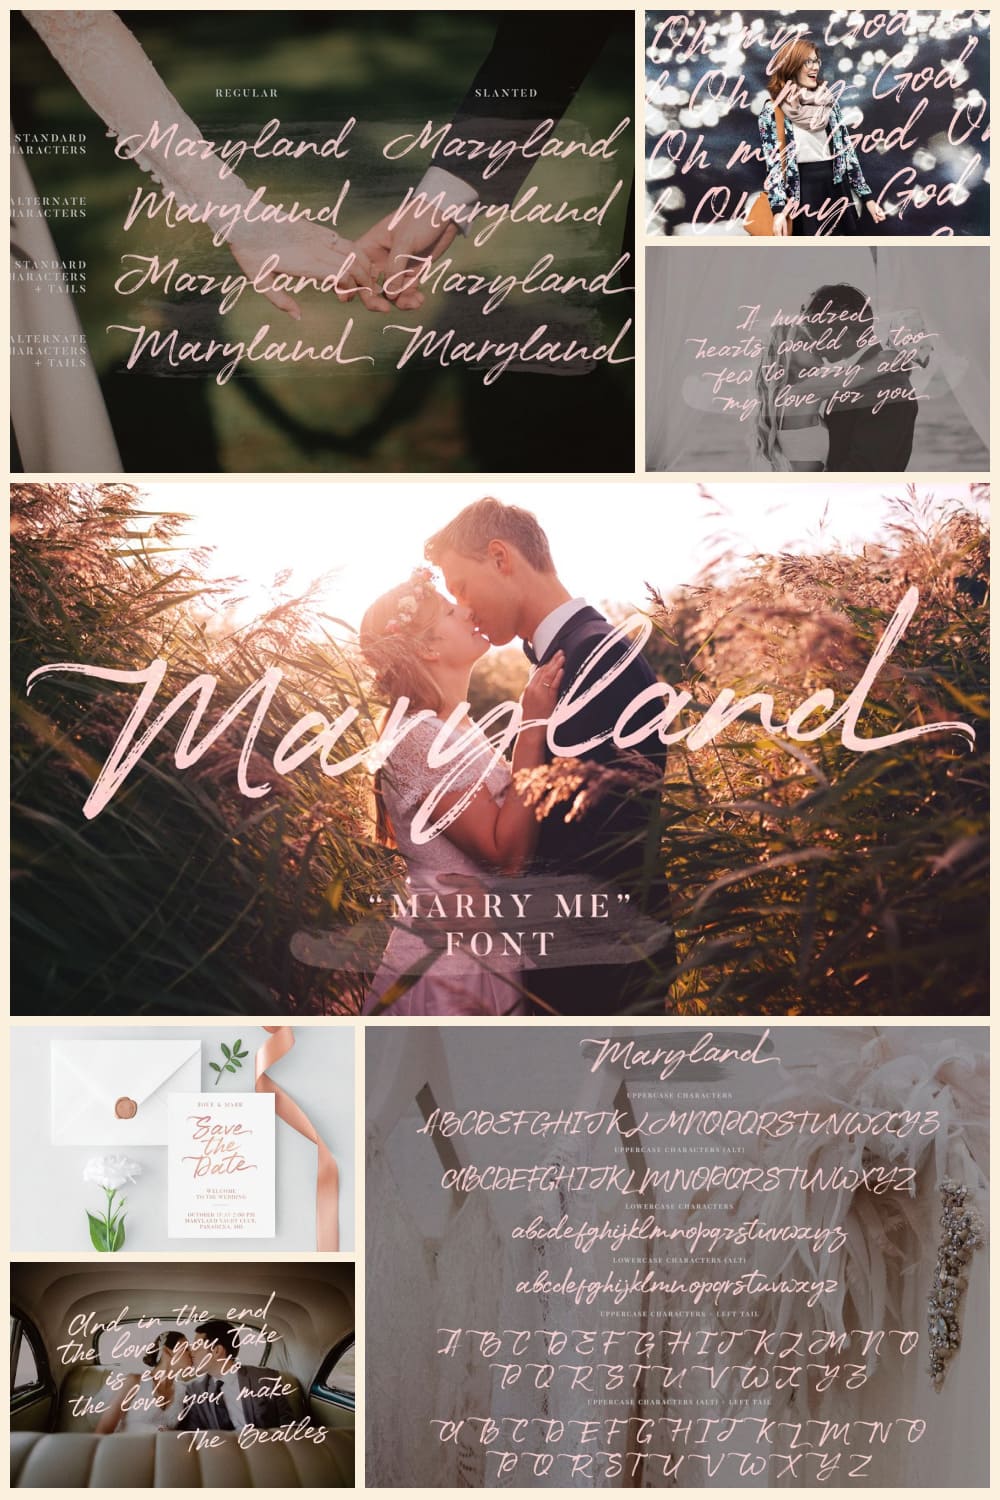 Collage of images of newlyweds with inscriptions.